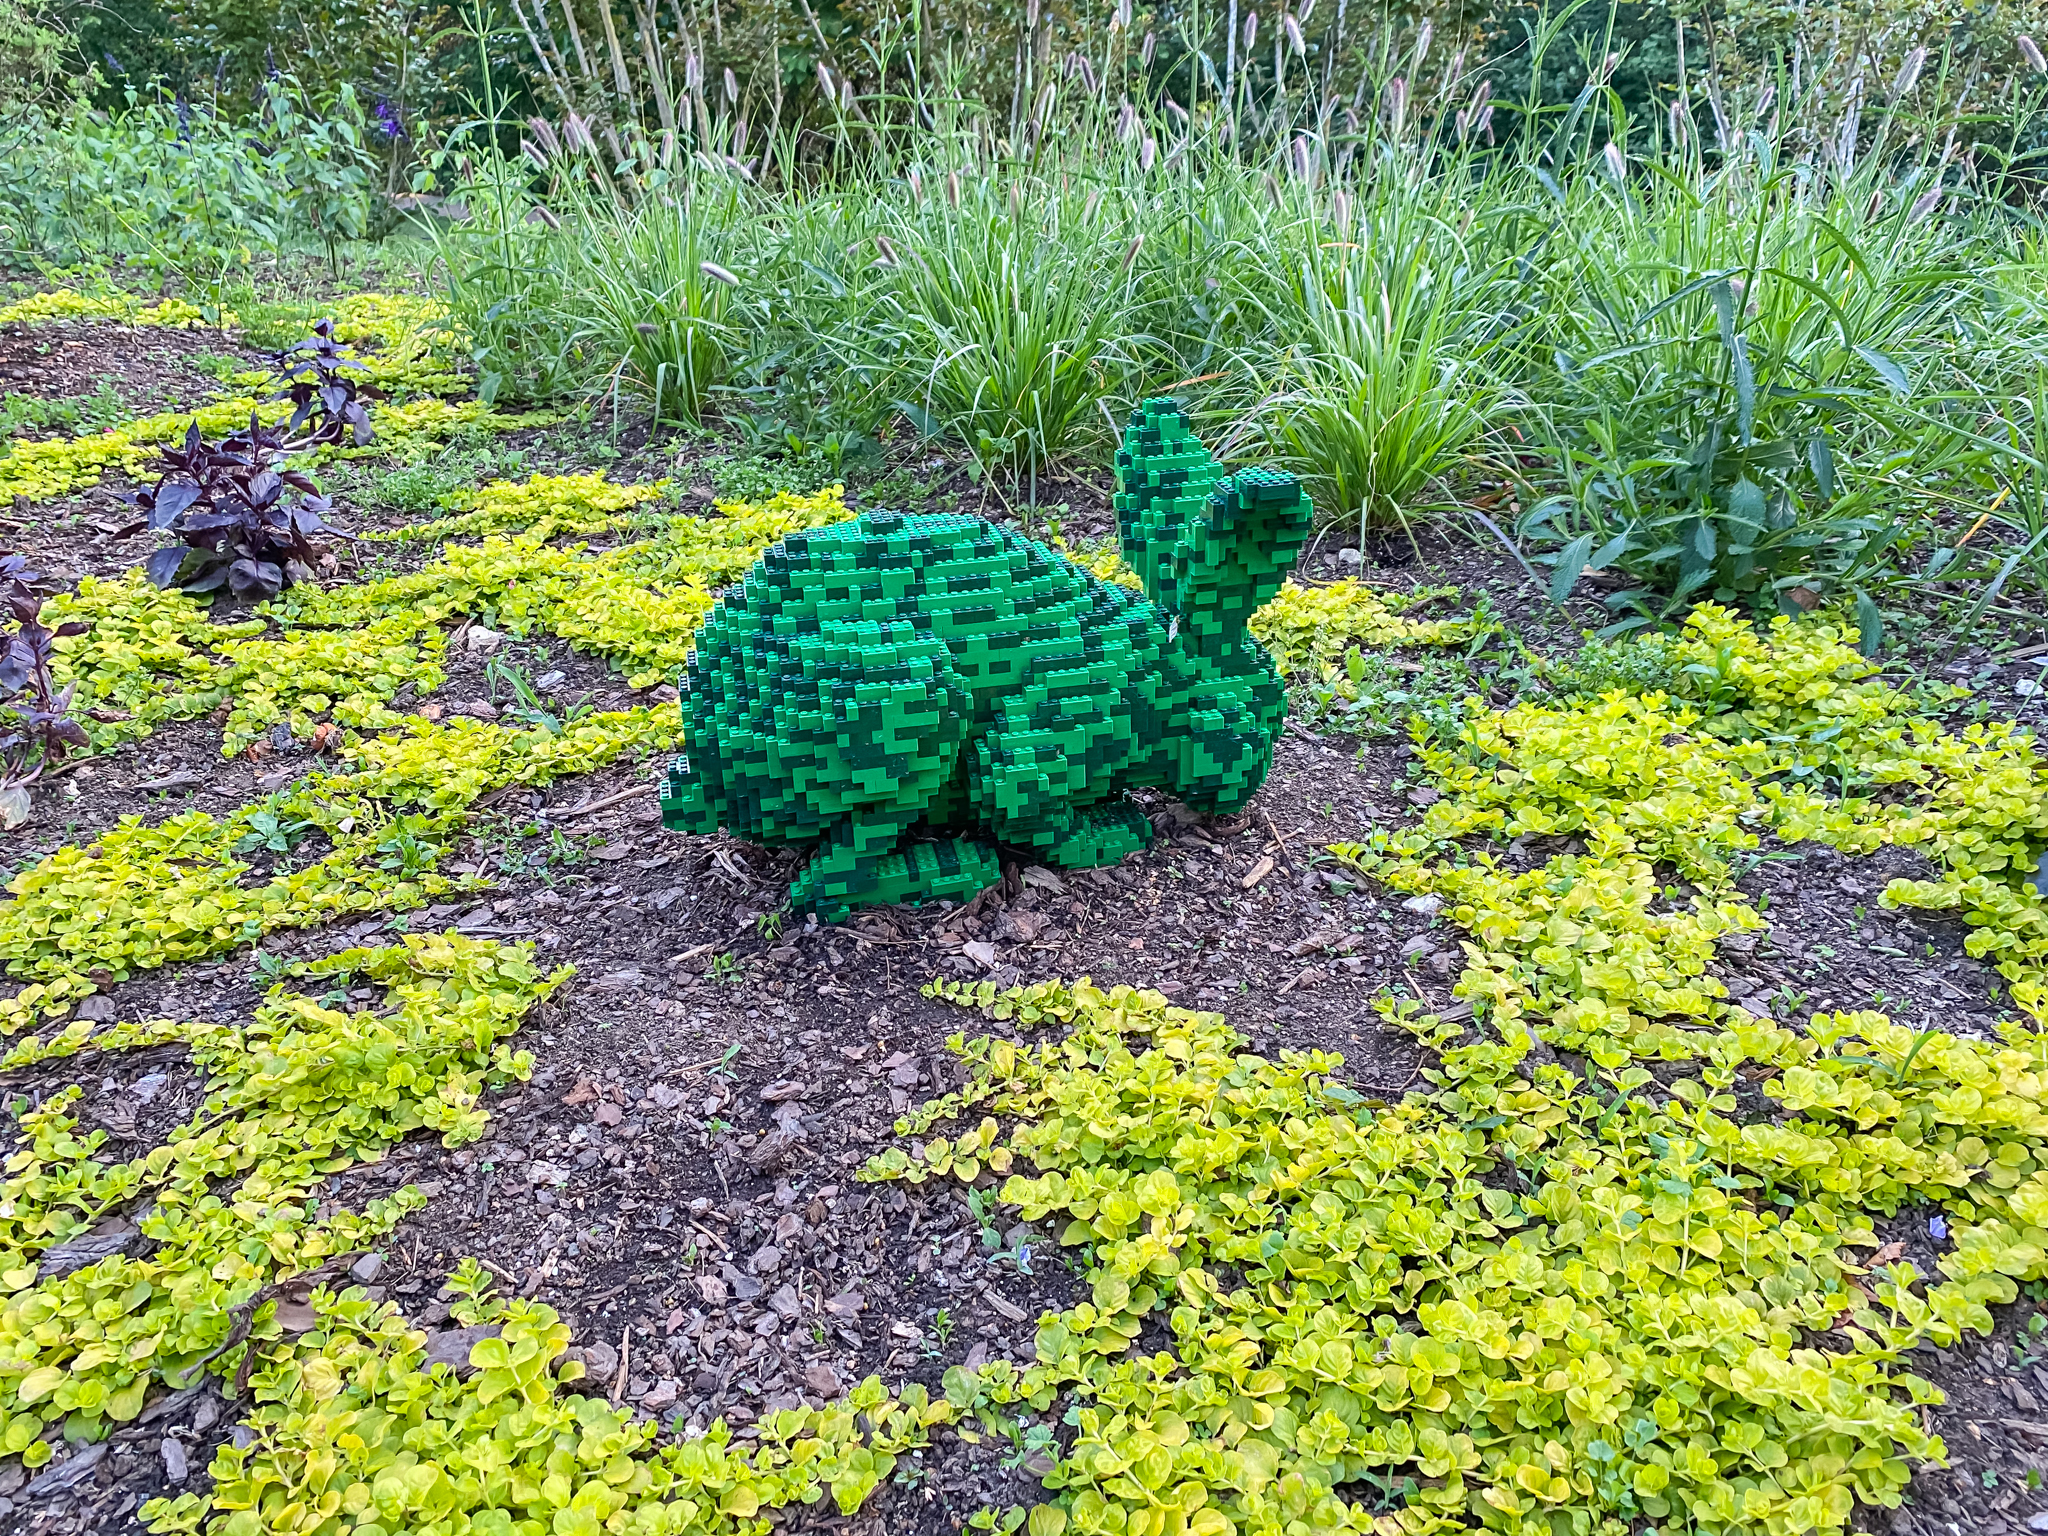 Light and dark green Lego rabbit surrounded by creeping jenny and ornamental grasses